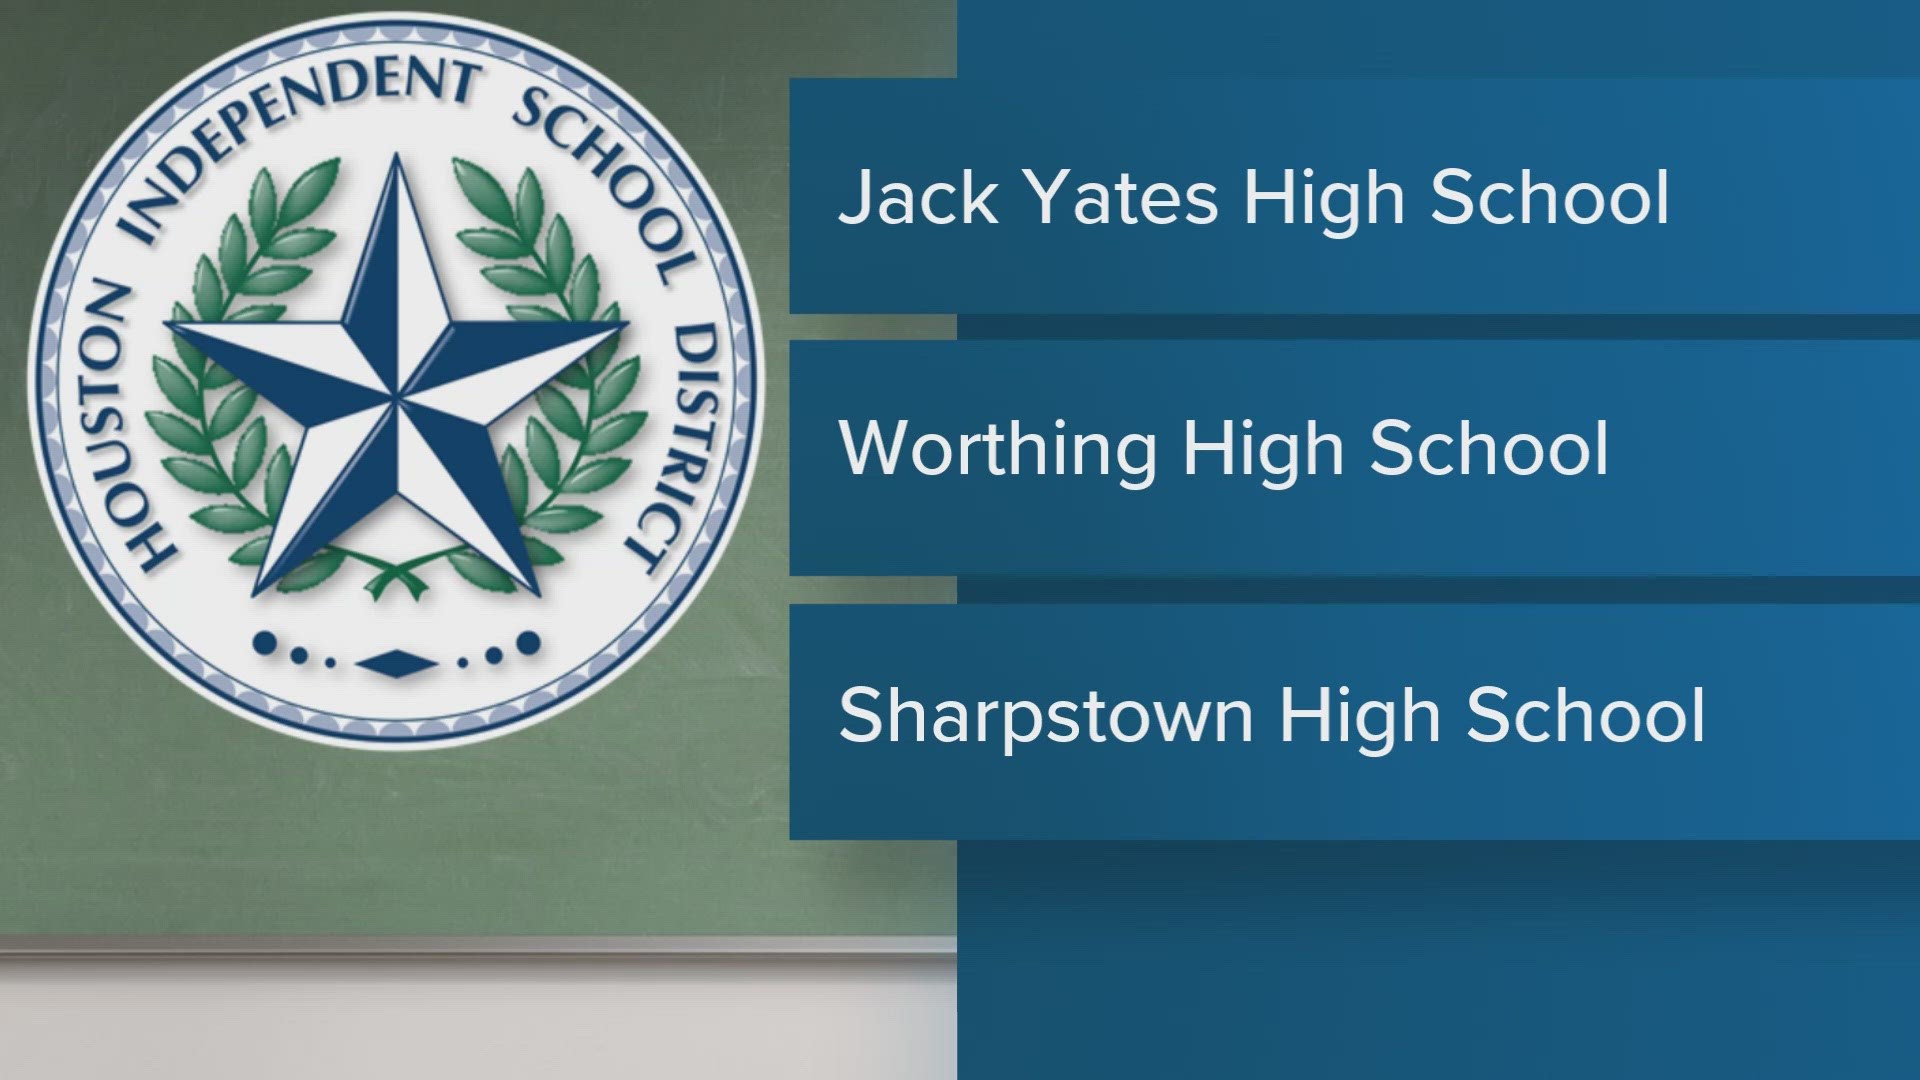 The principals at Jack Yates, Worthing, and Sharpstown high schools were contacted Wednesday morning along with each school community.